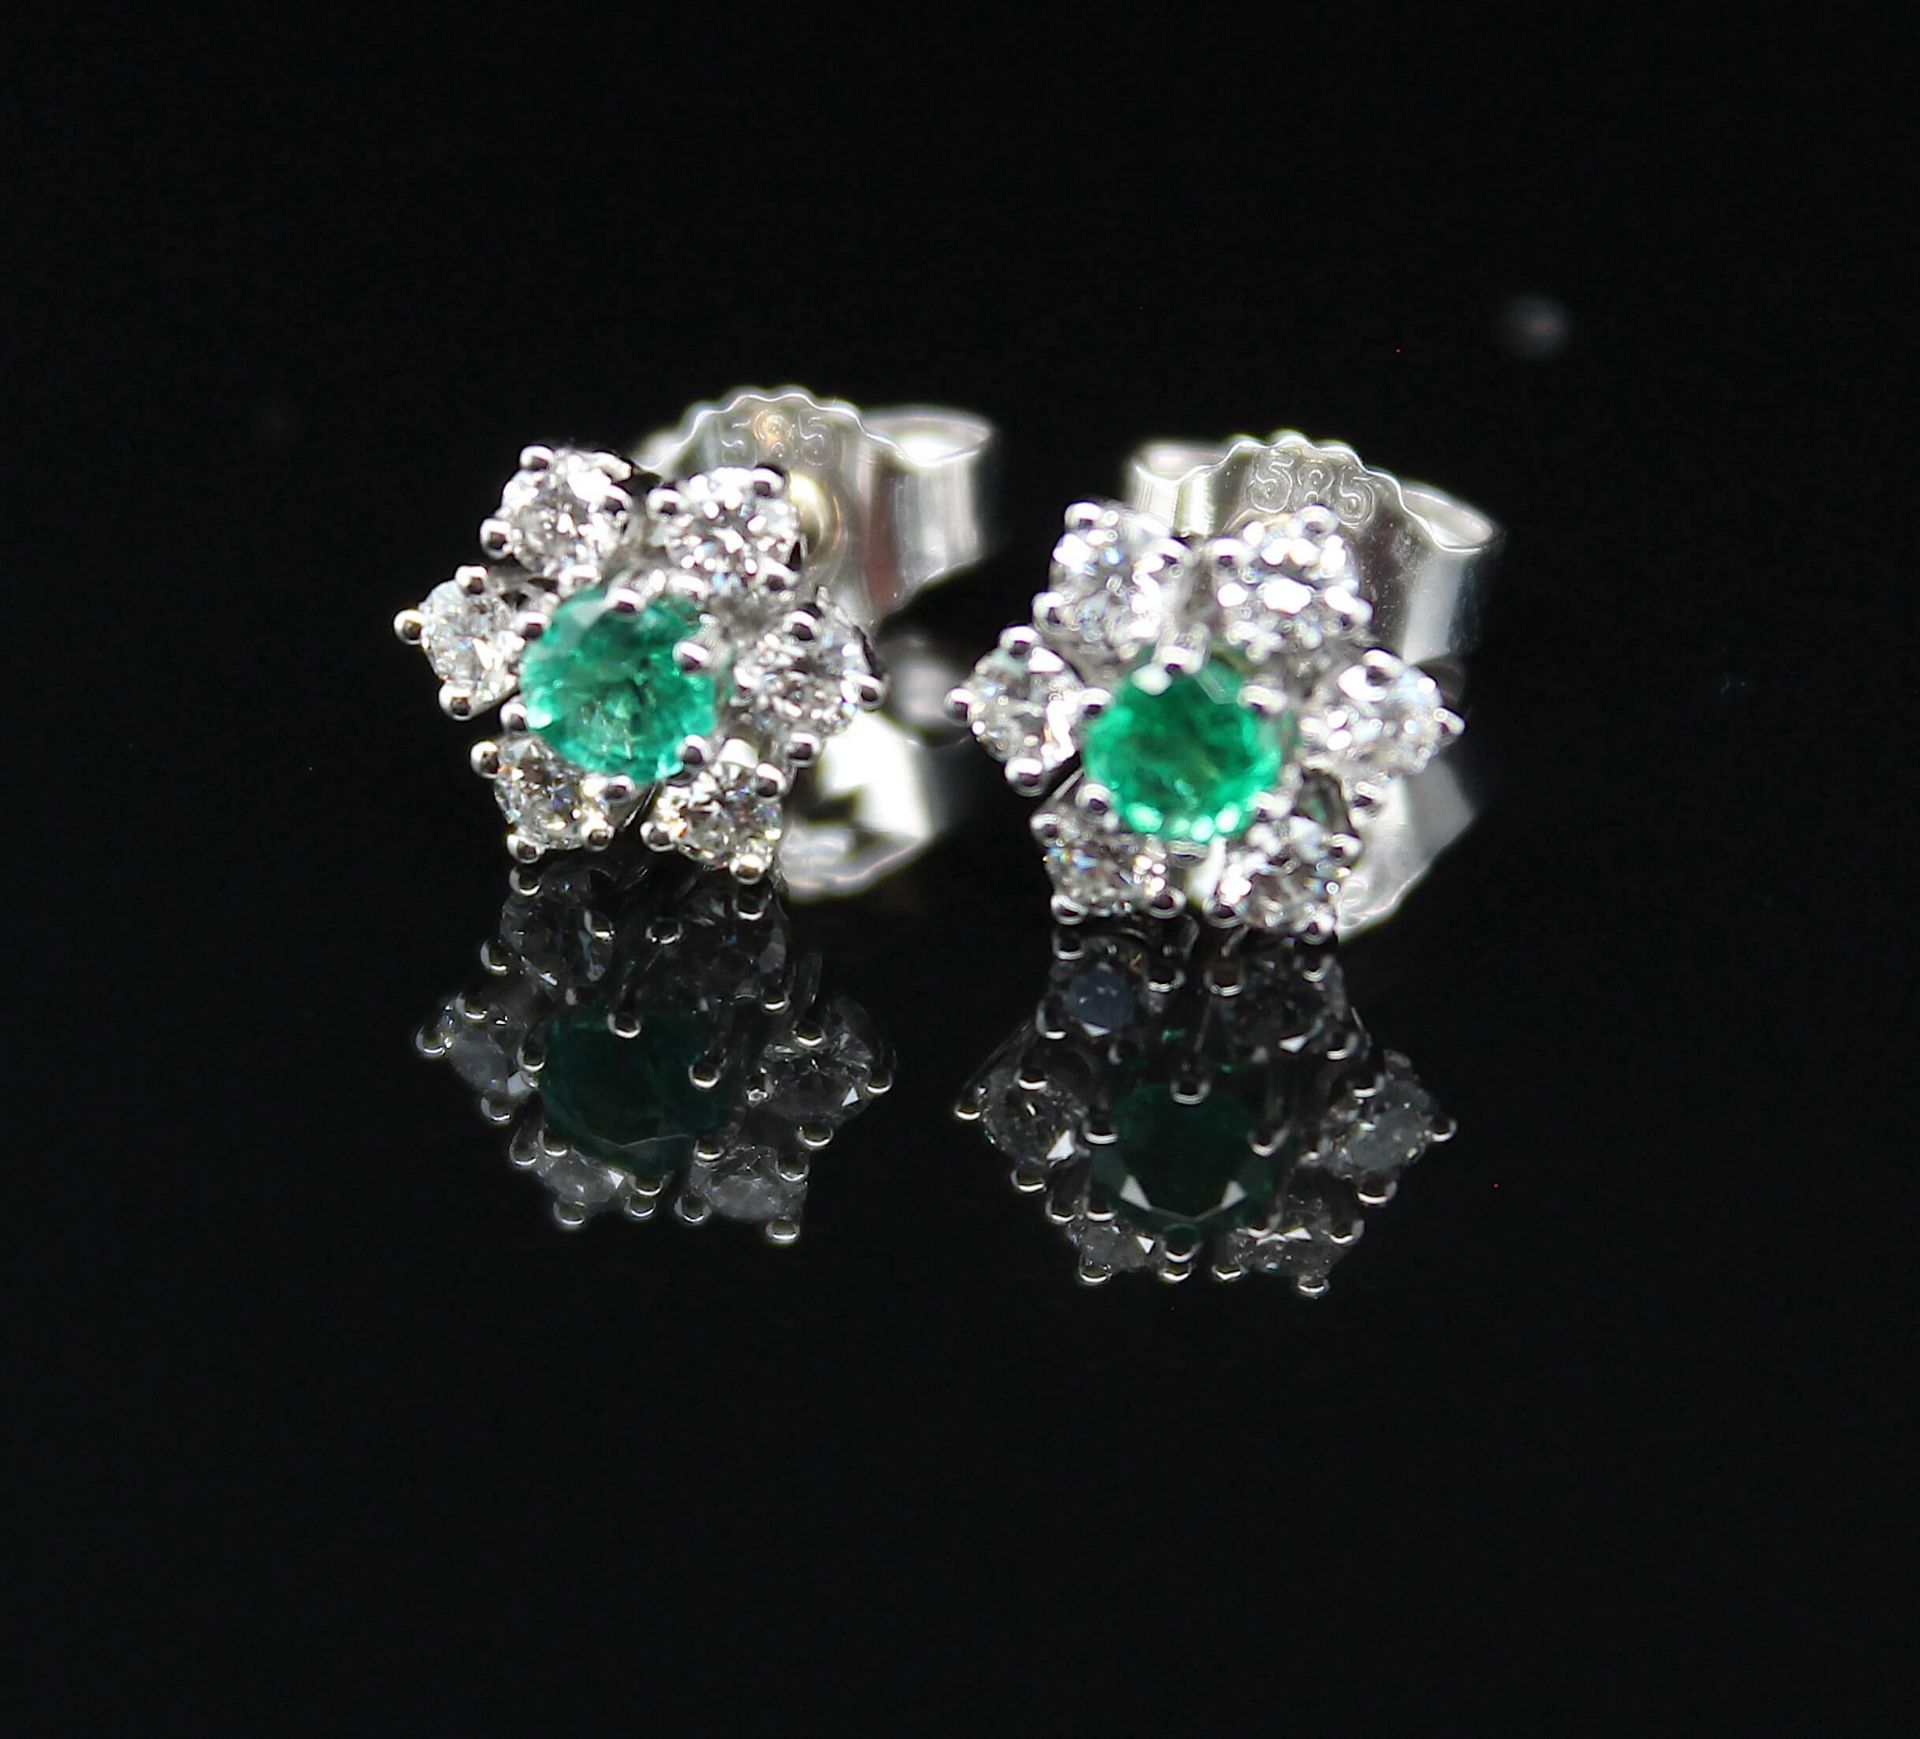 Stud earrings with emerald and brilliants total ca. 0,36 ct - Image 2 of 3